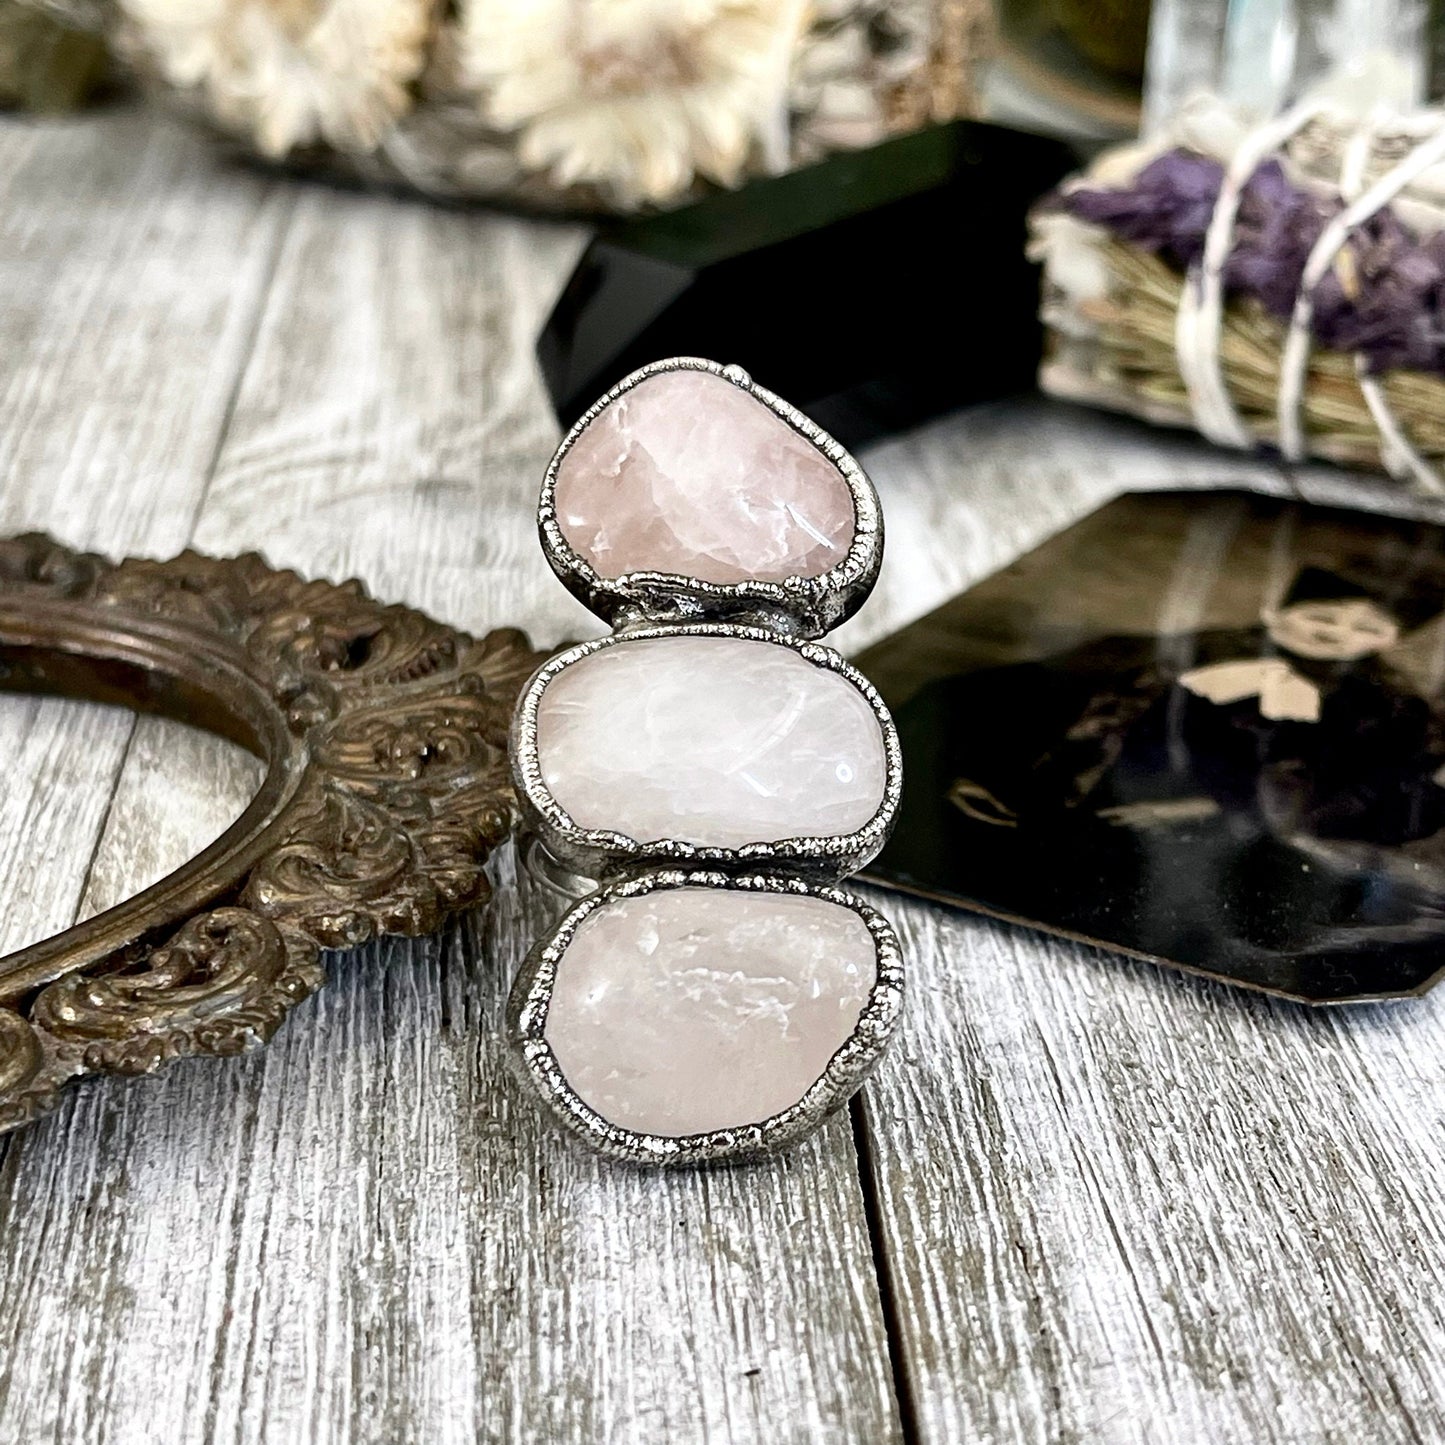 Size 9.5 Crystal Ring - Three Stone Pink Rose Quartz Ring in Silver / Foxlark Collection - One of a Kind / Big Boho Crystal Jewelry